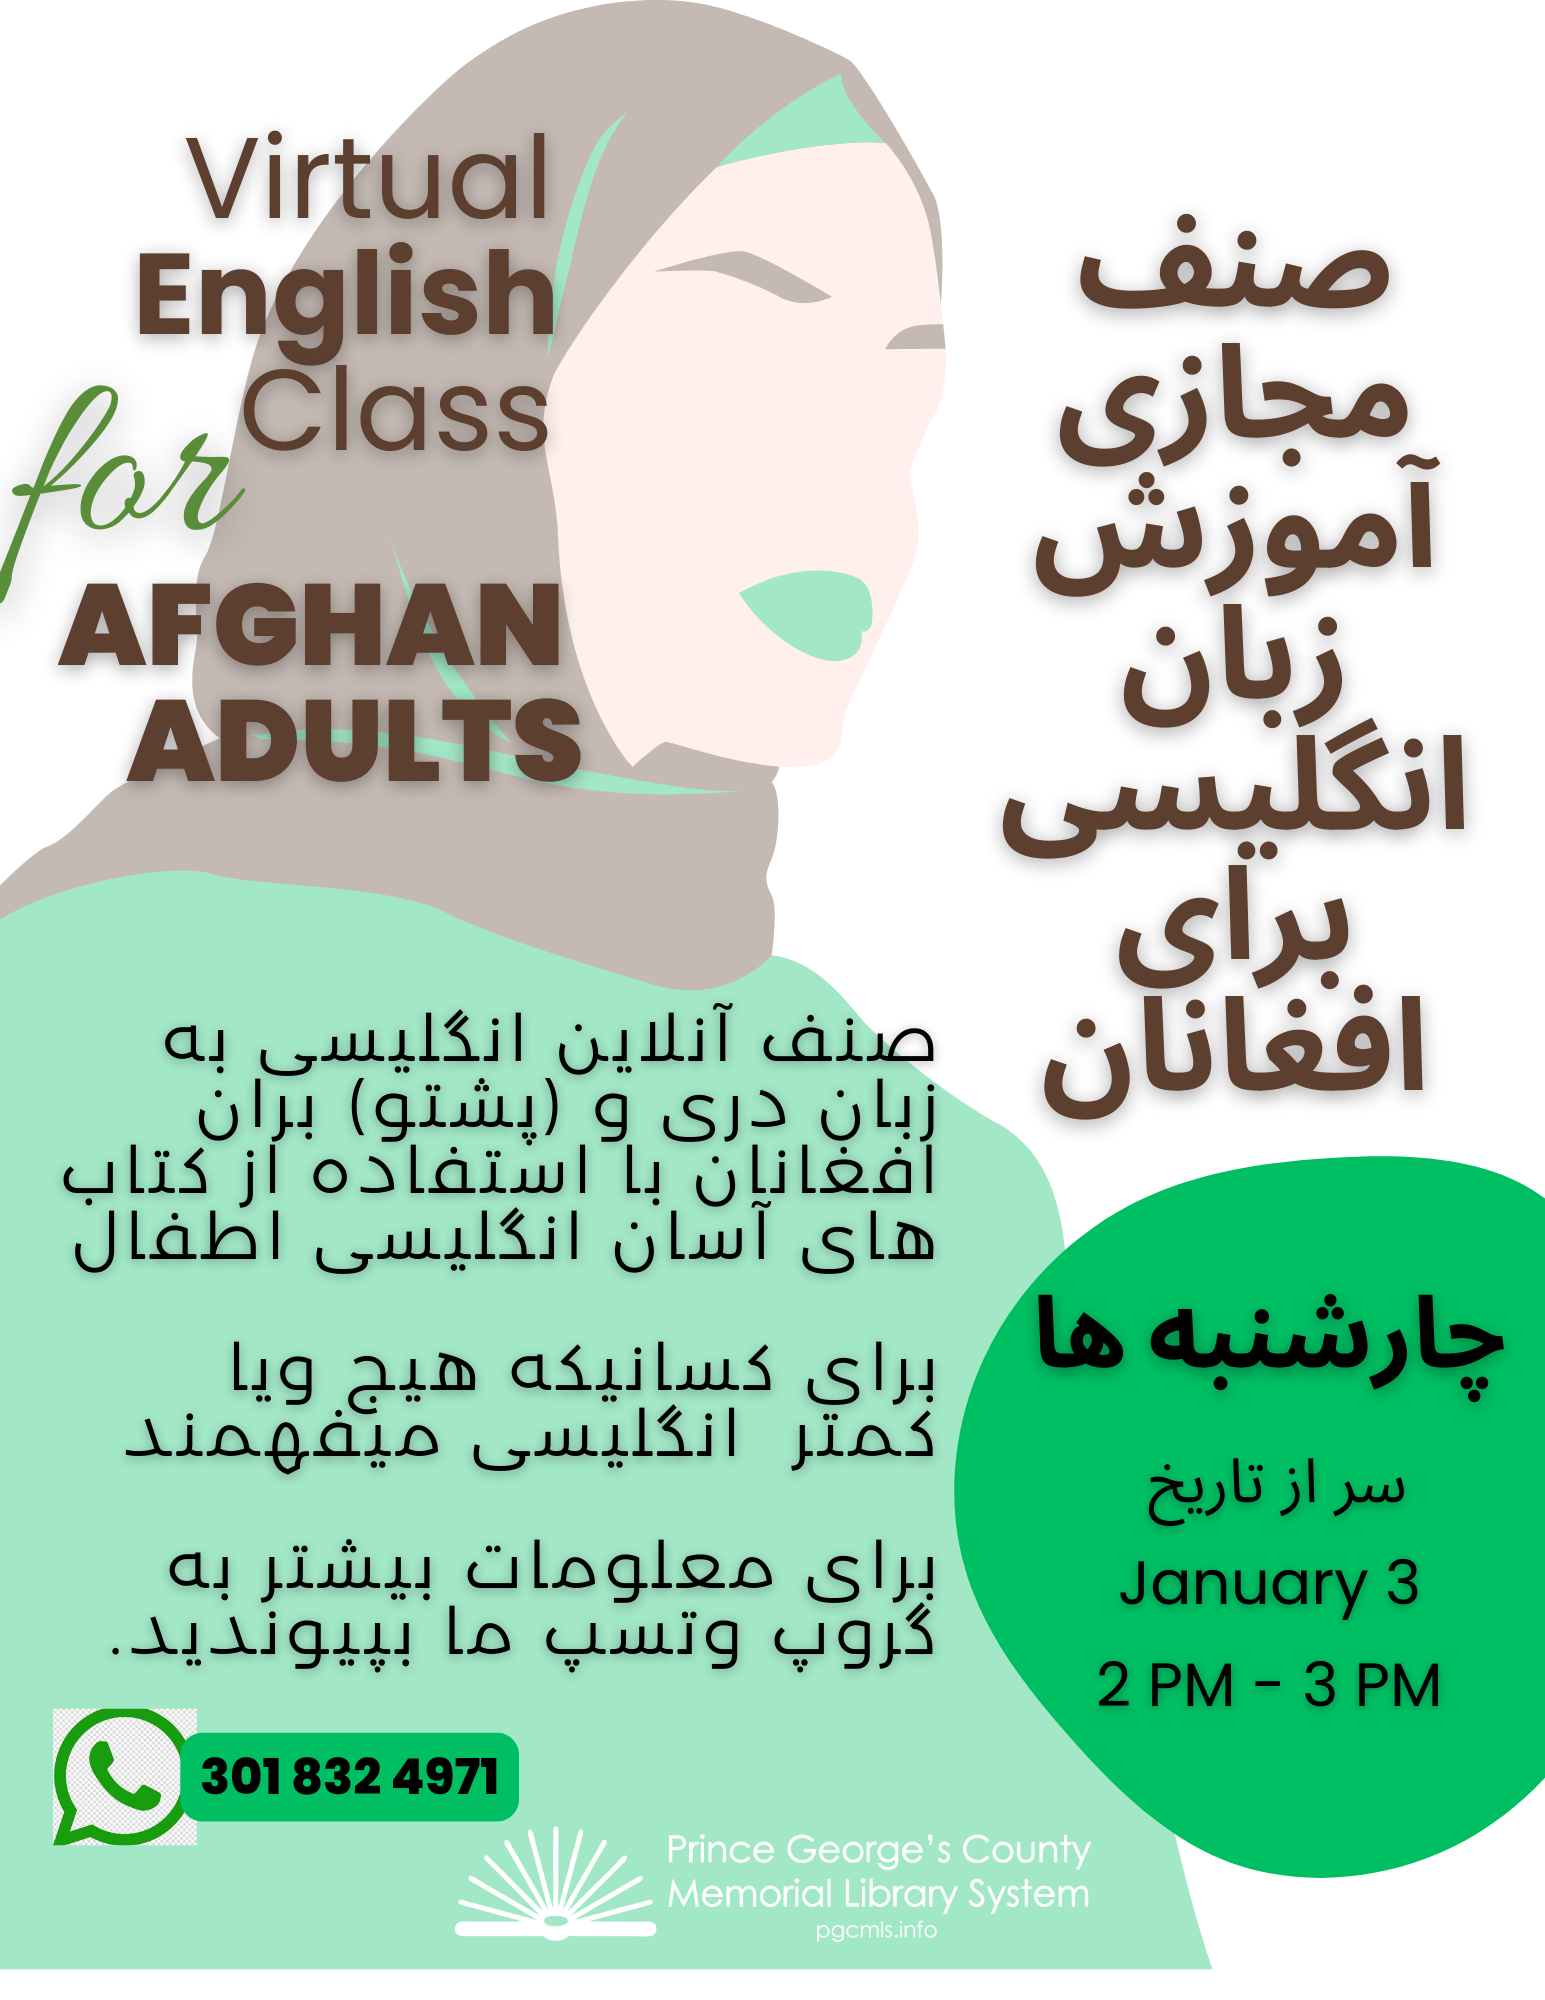 English Class for Afghan Adults